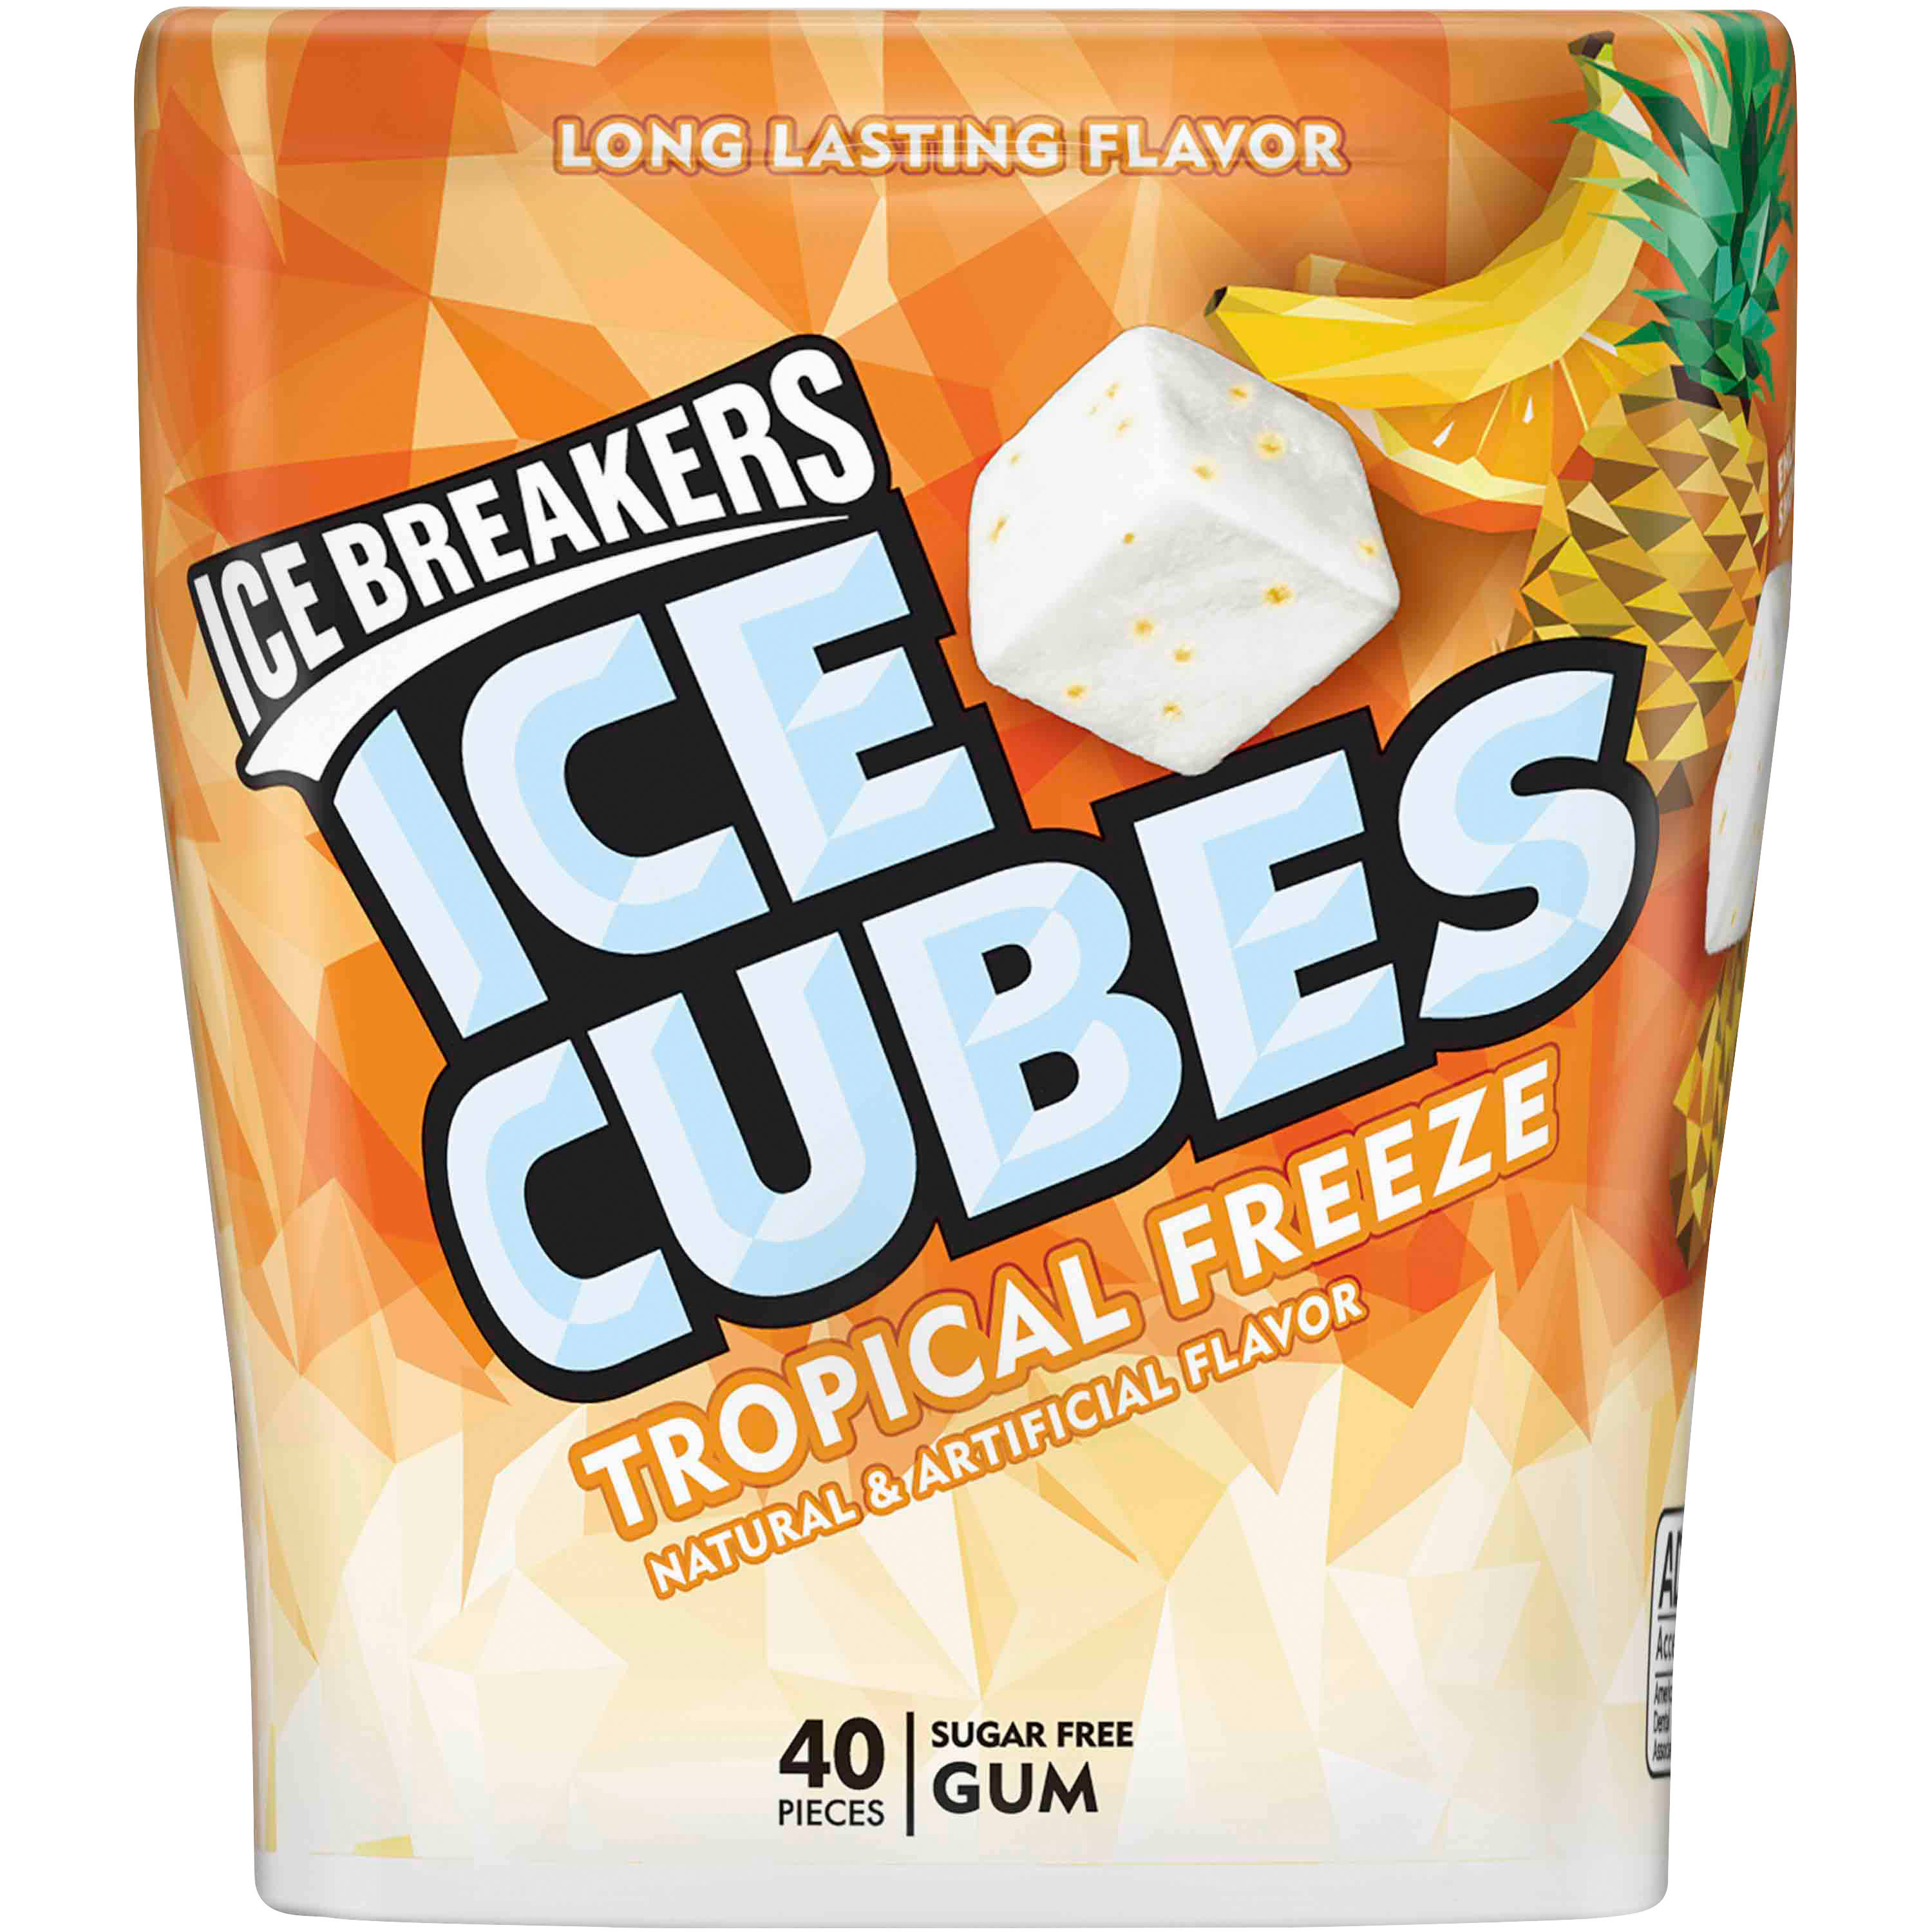 Ice Breakers Ice Cubes Gum, Sugar Free, Tropical Freeze - 40 pieces